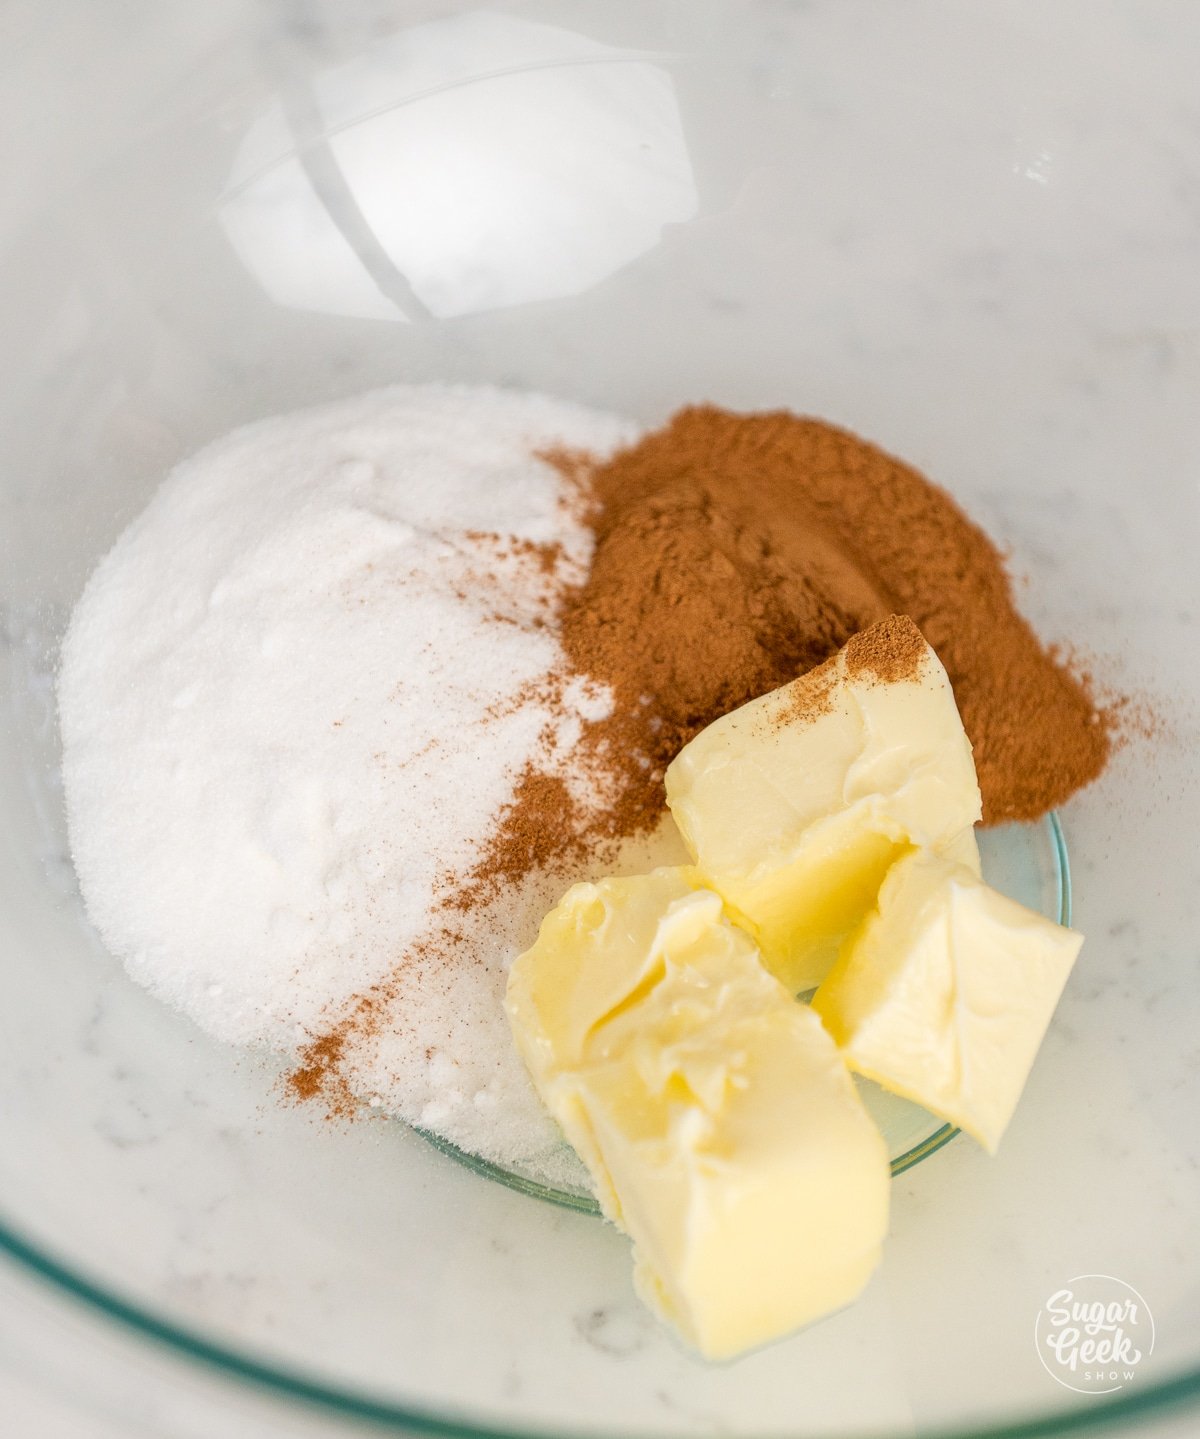 butter, cinnamon, and sugar in a glass bowl